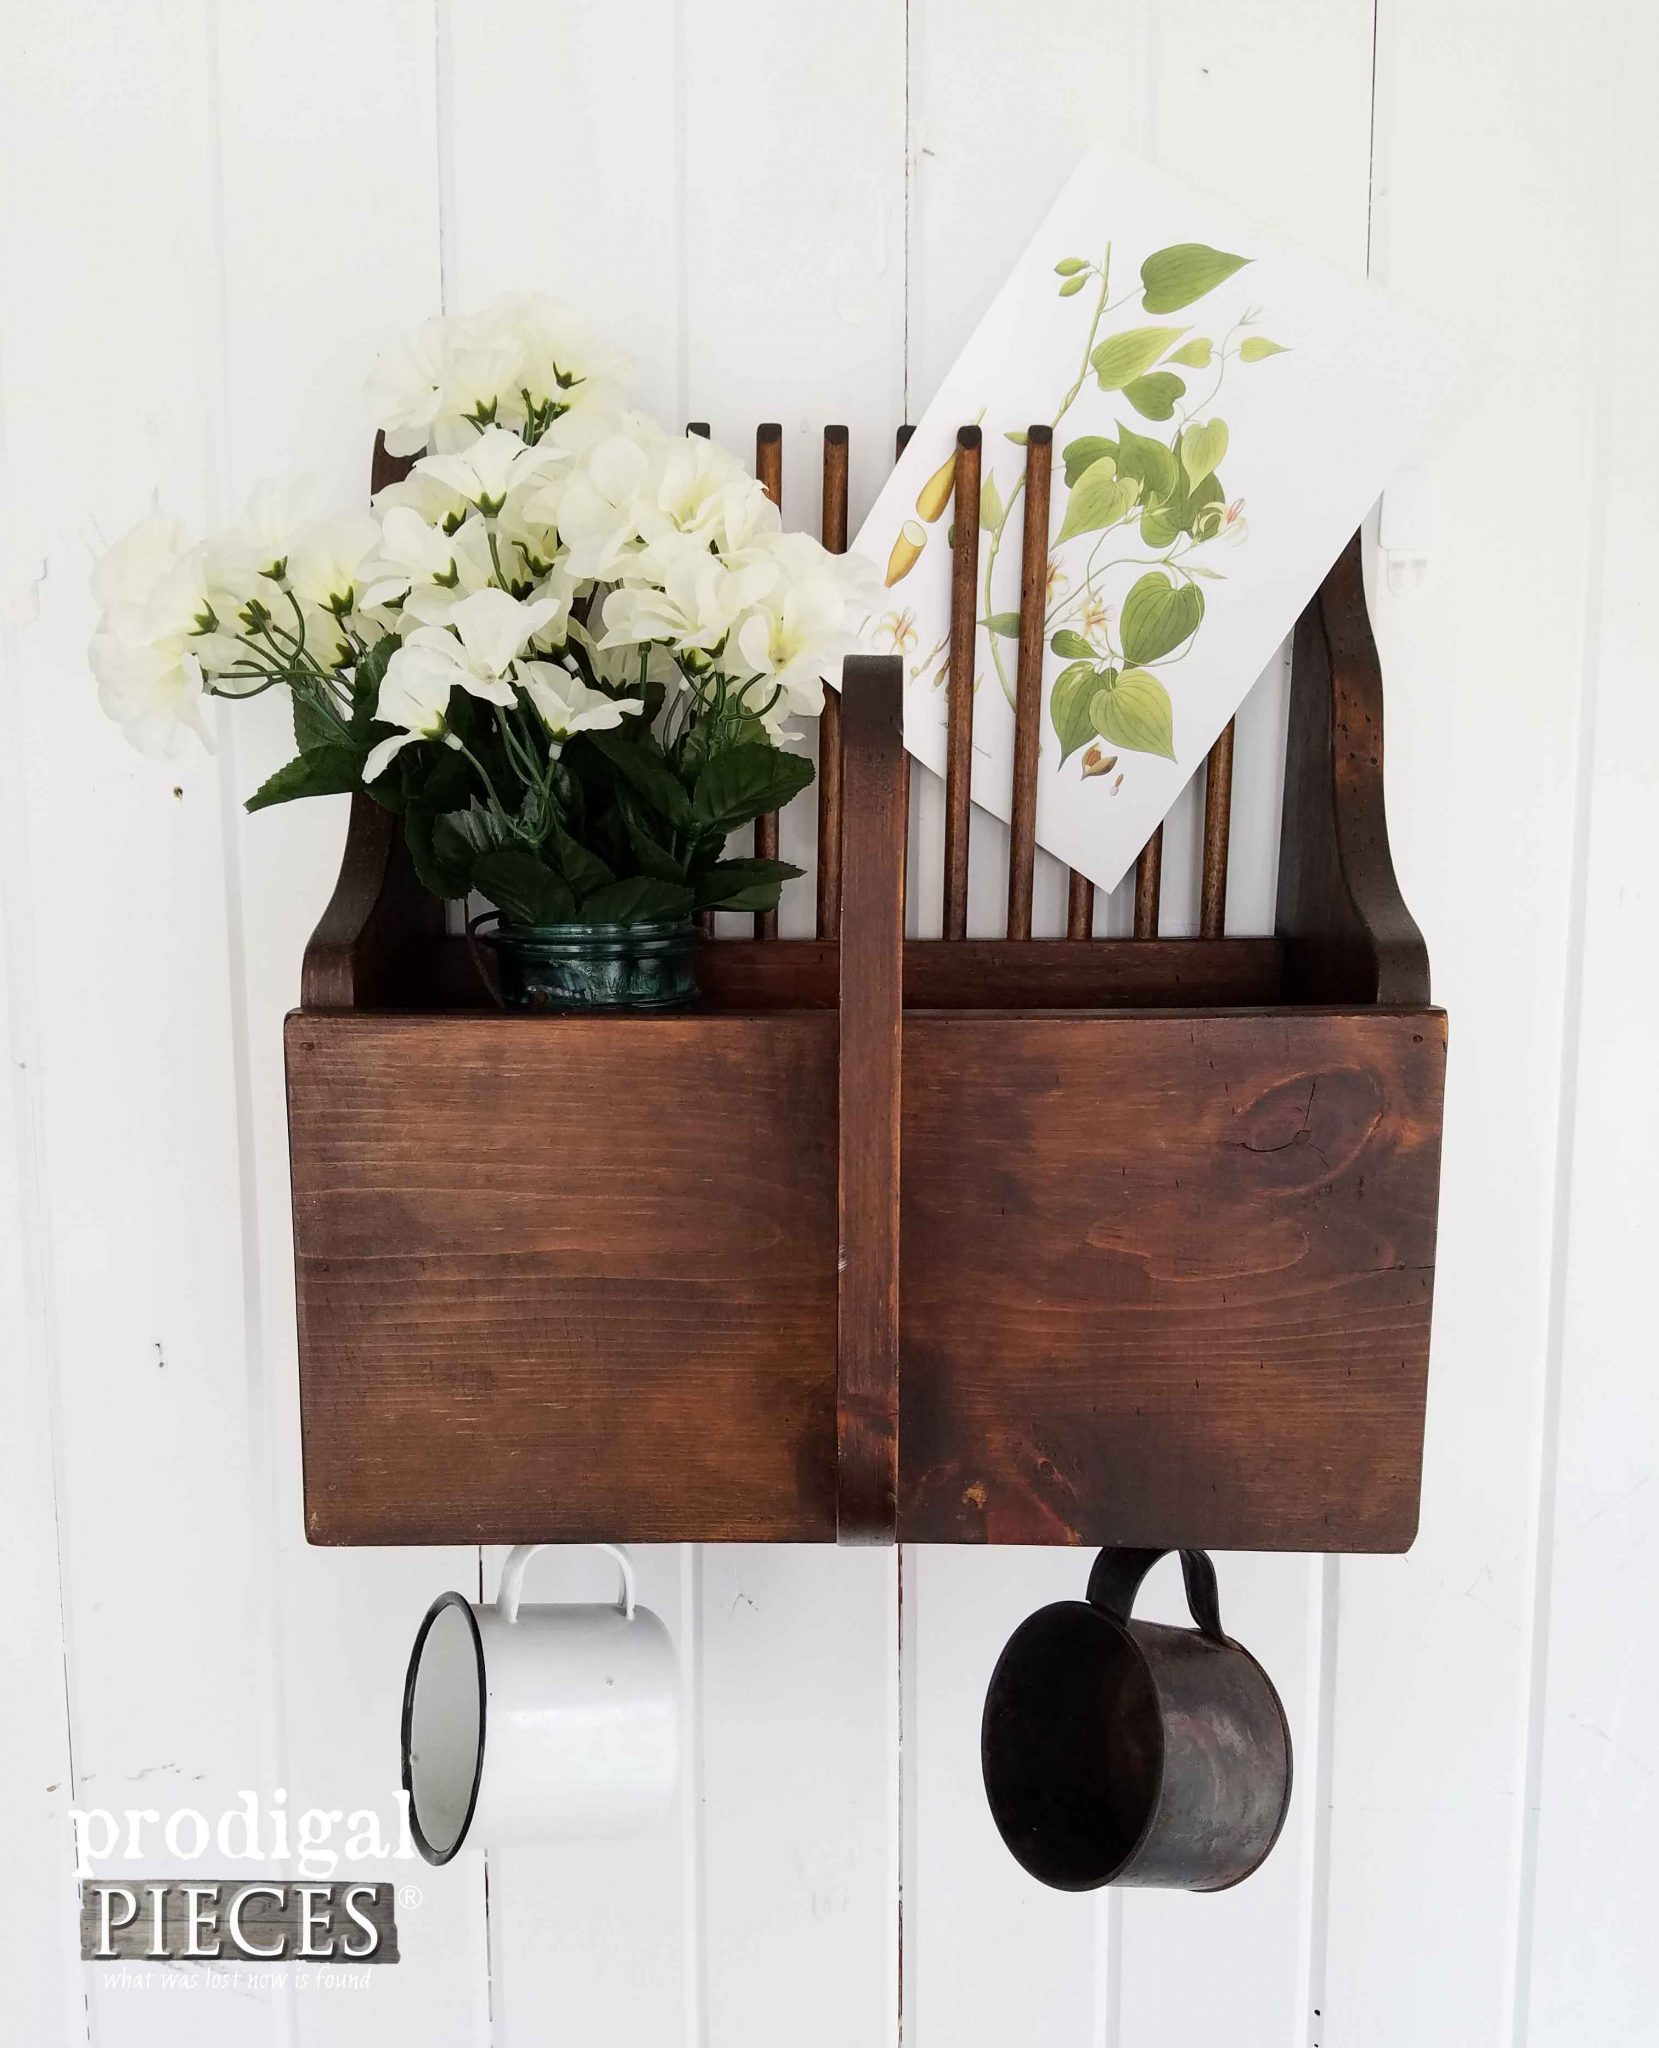 Apple Picker Repurposed into a Wall Pocket for Thrifty Farmhouse Decor by Prodigal Pieces | prodigalpieces.com